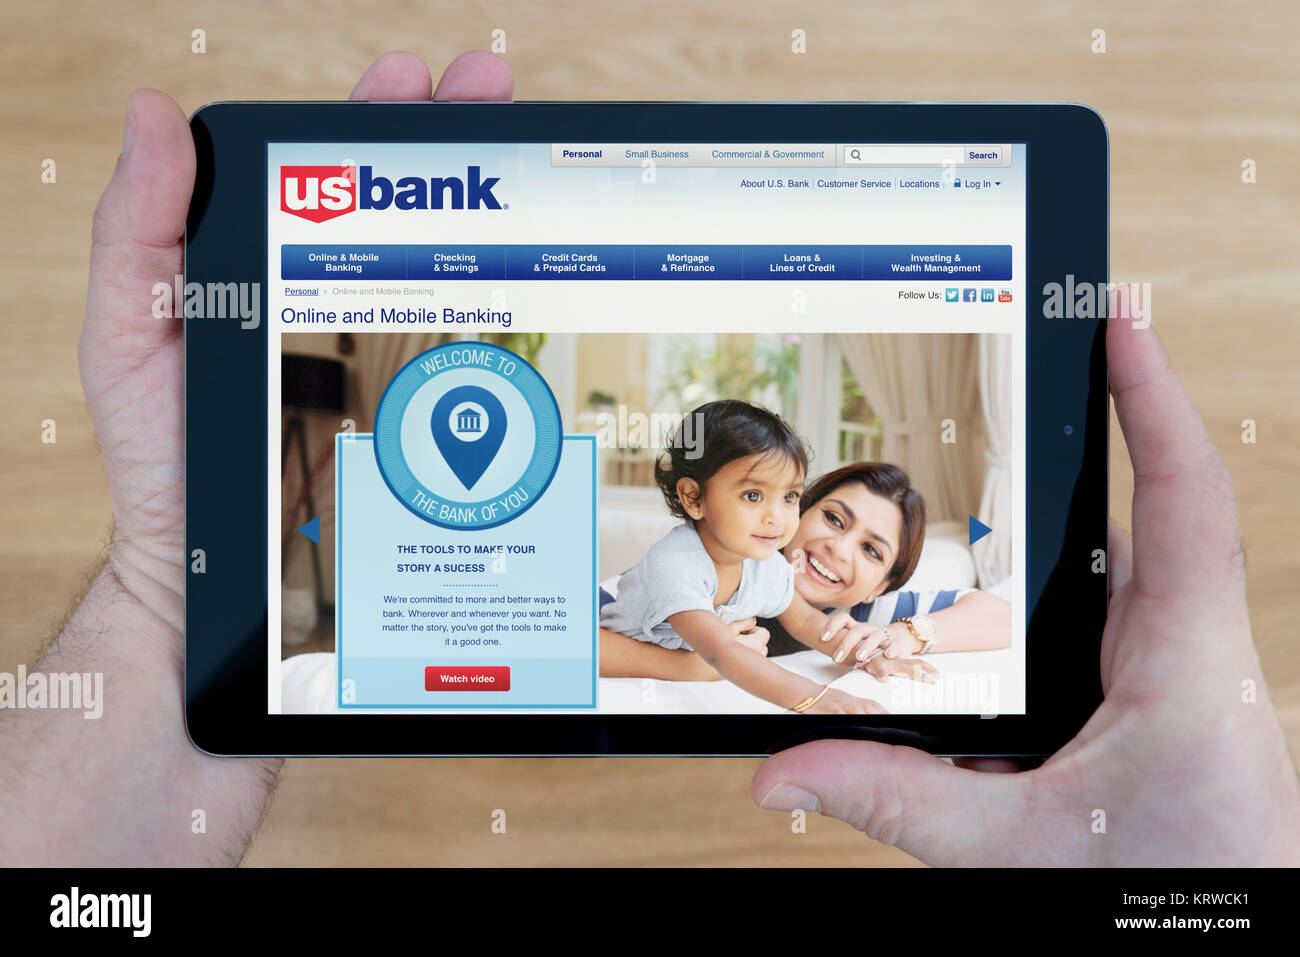 A man looks at the US Bank website on his iPad tablet device, shot against a wooden table top background (Editorial use only) Stock Photo